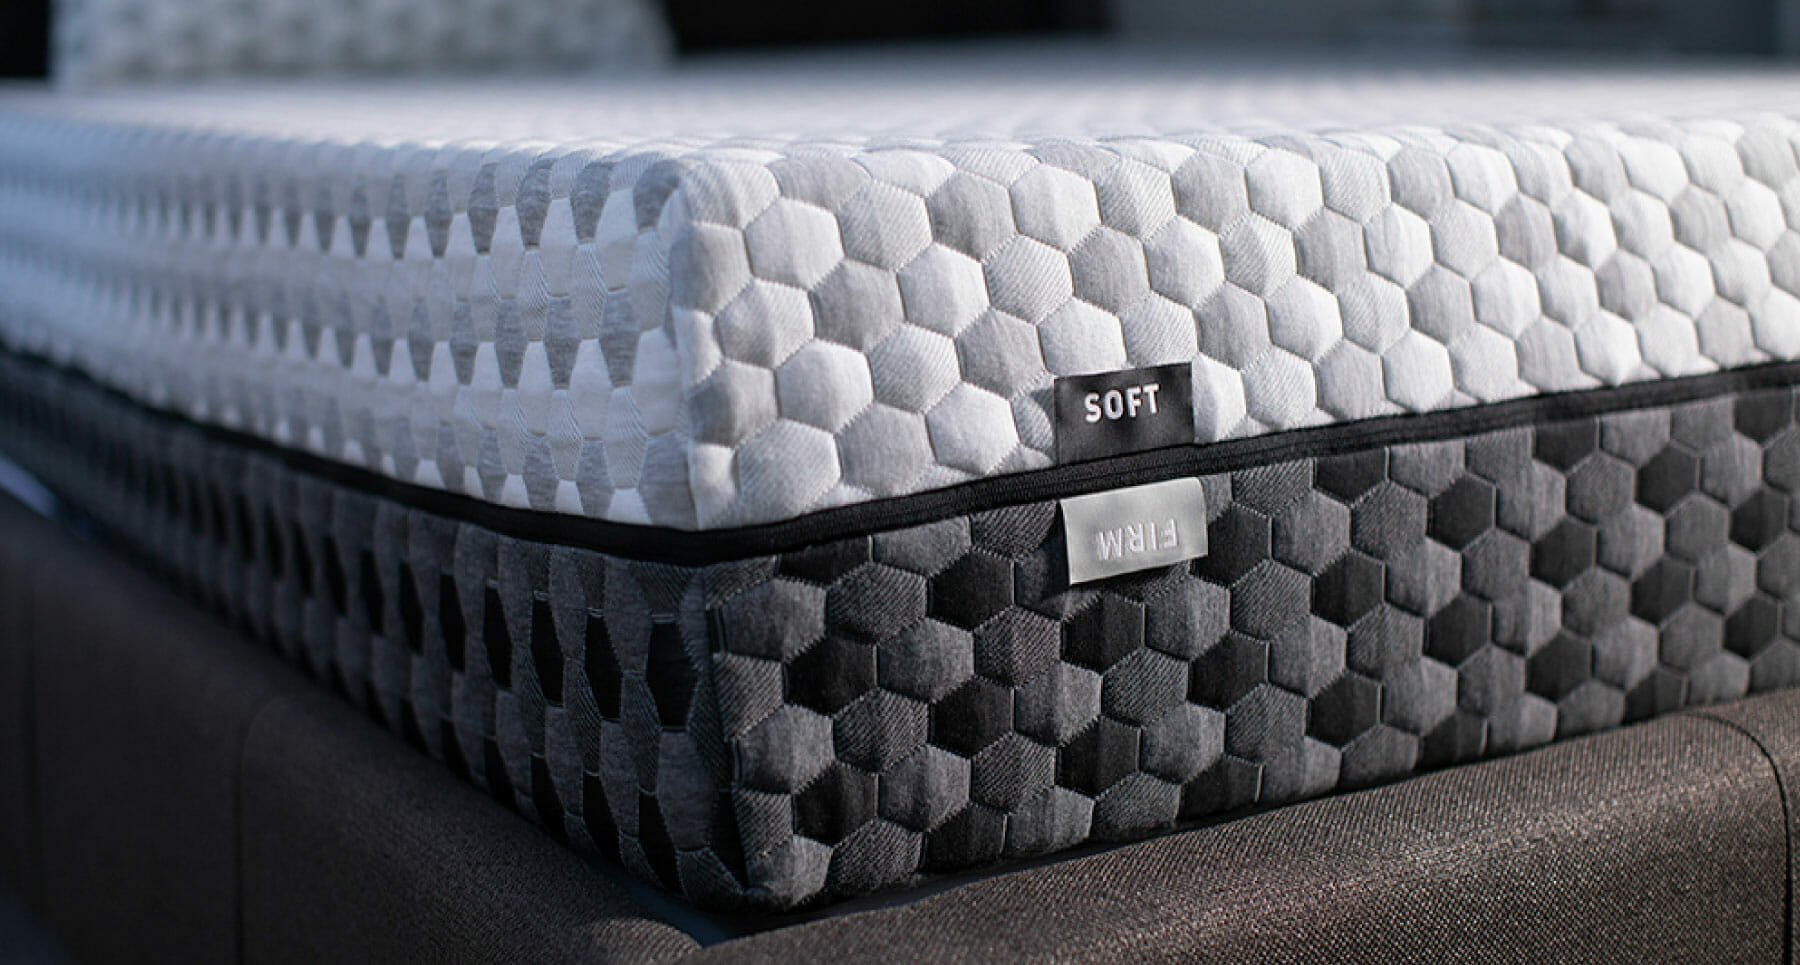 best type of mattress for hip pain uk